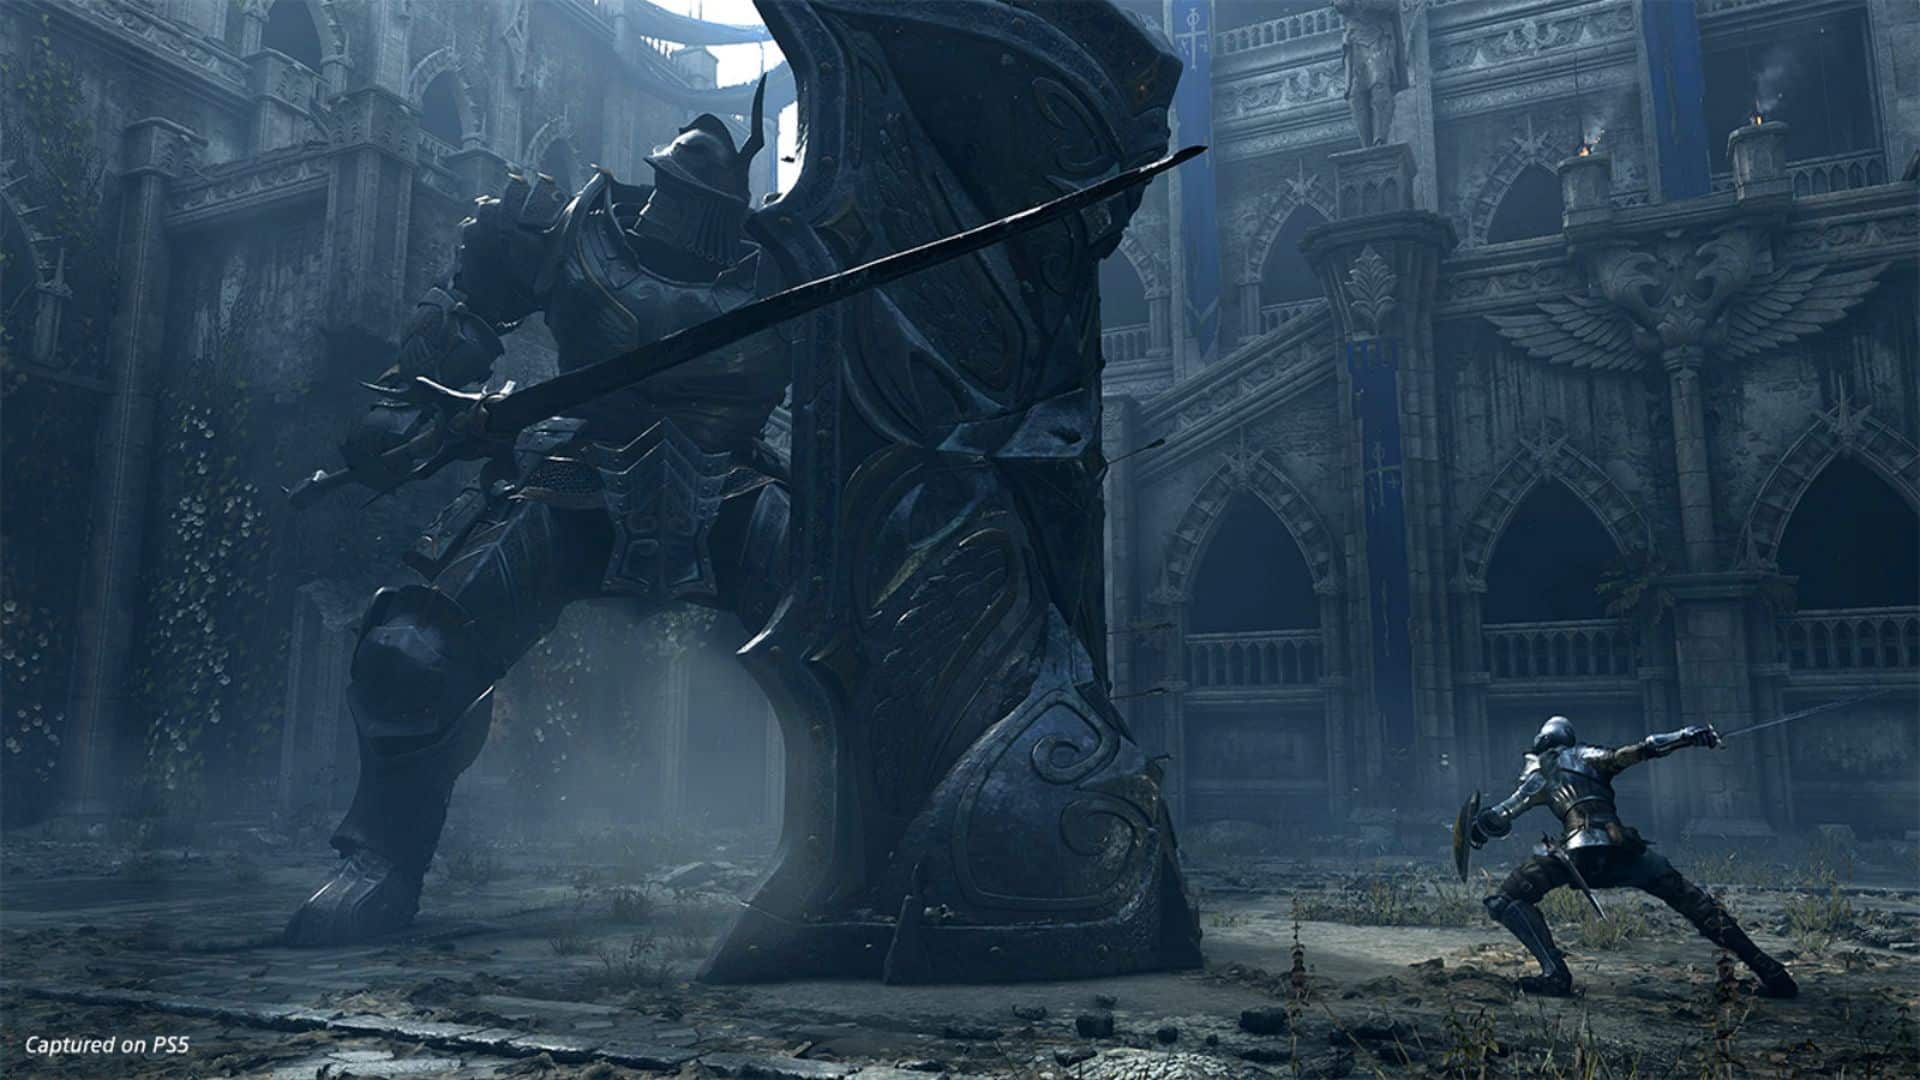 player fighting tower knight in demon's souls remake